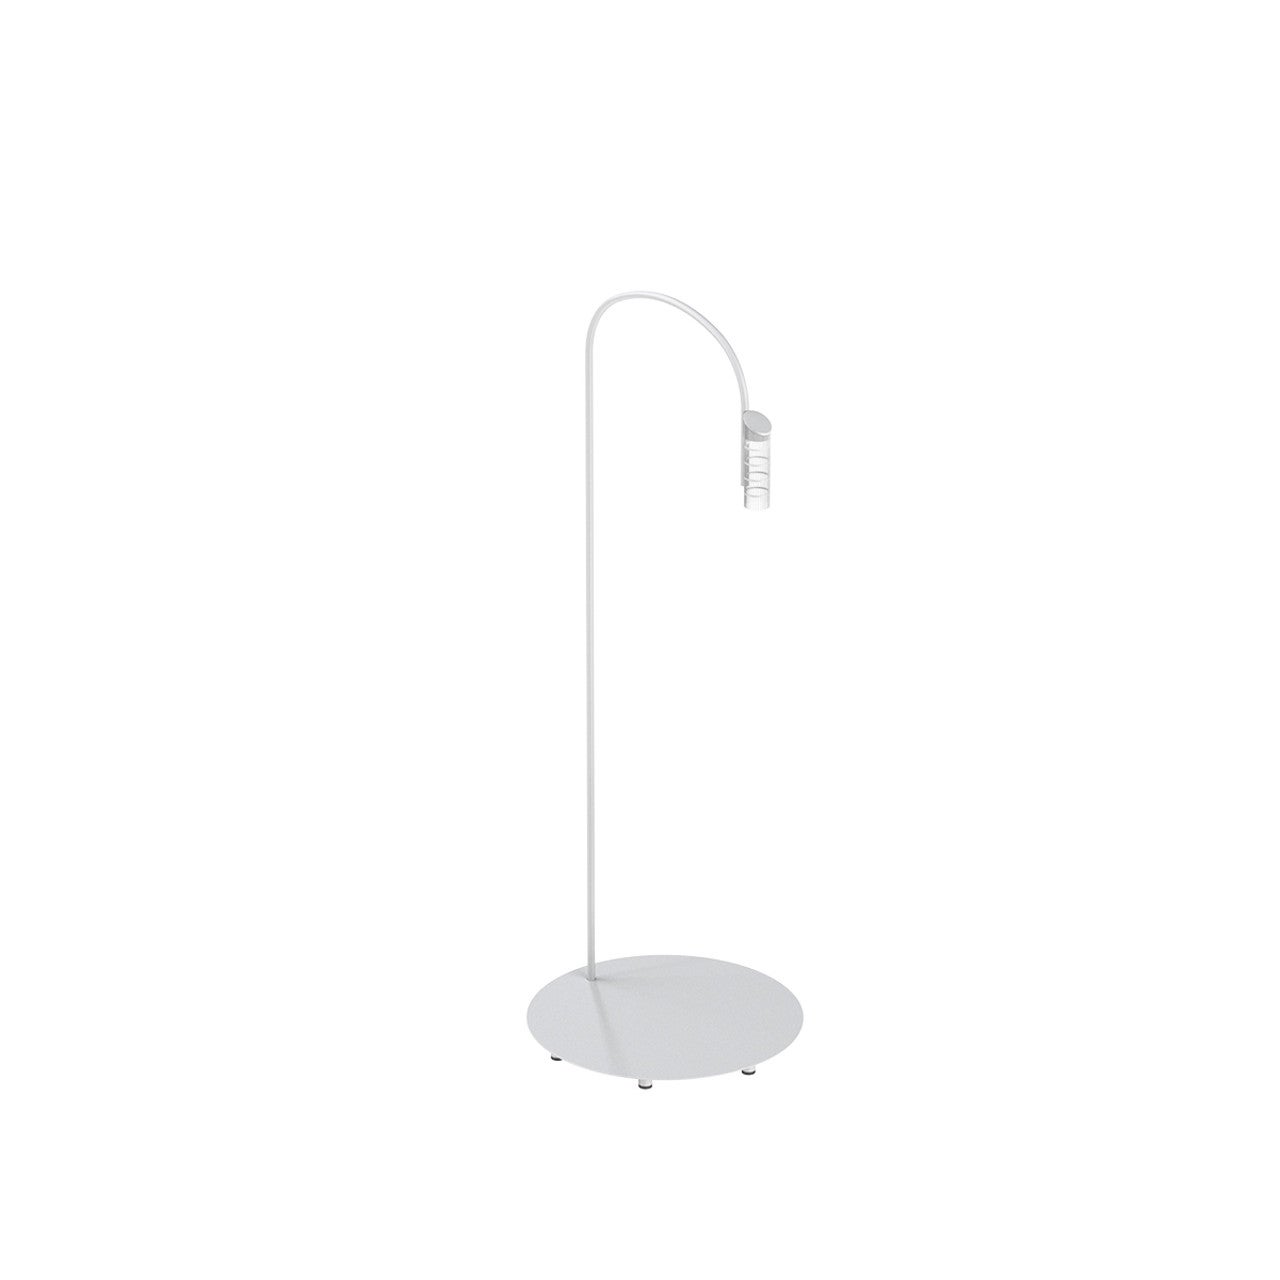 Flos Caule 2700K Model 3 Outdoor Floor Lamp in White with Nest Shade